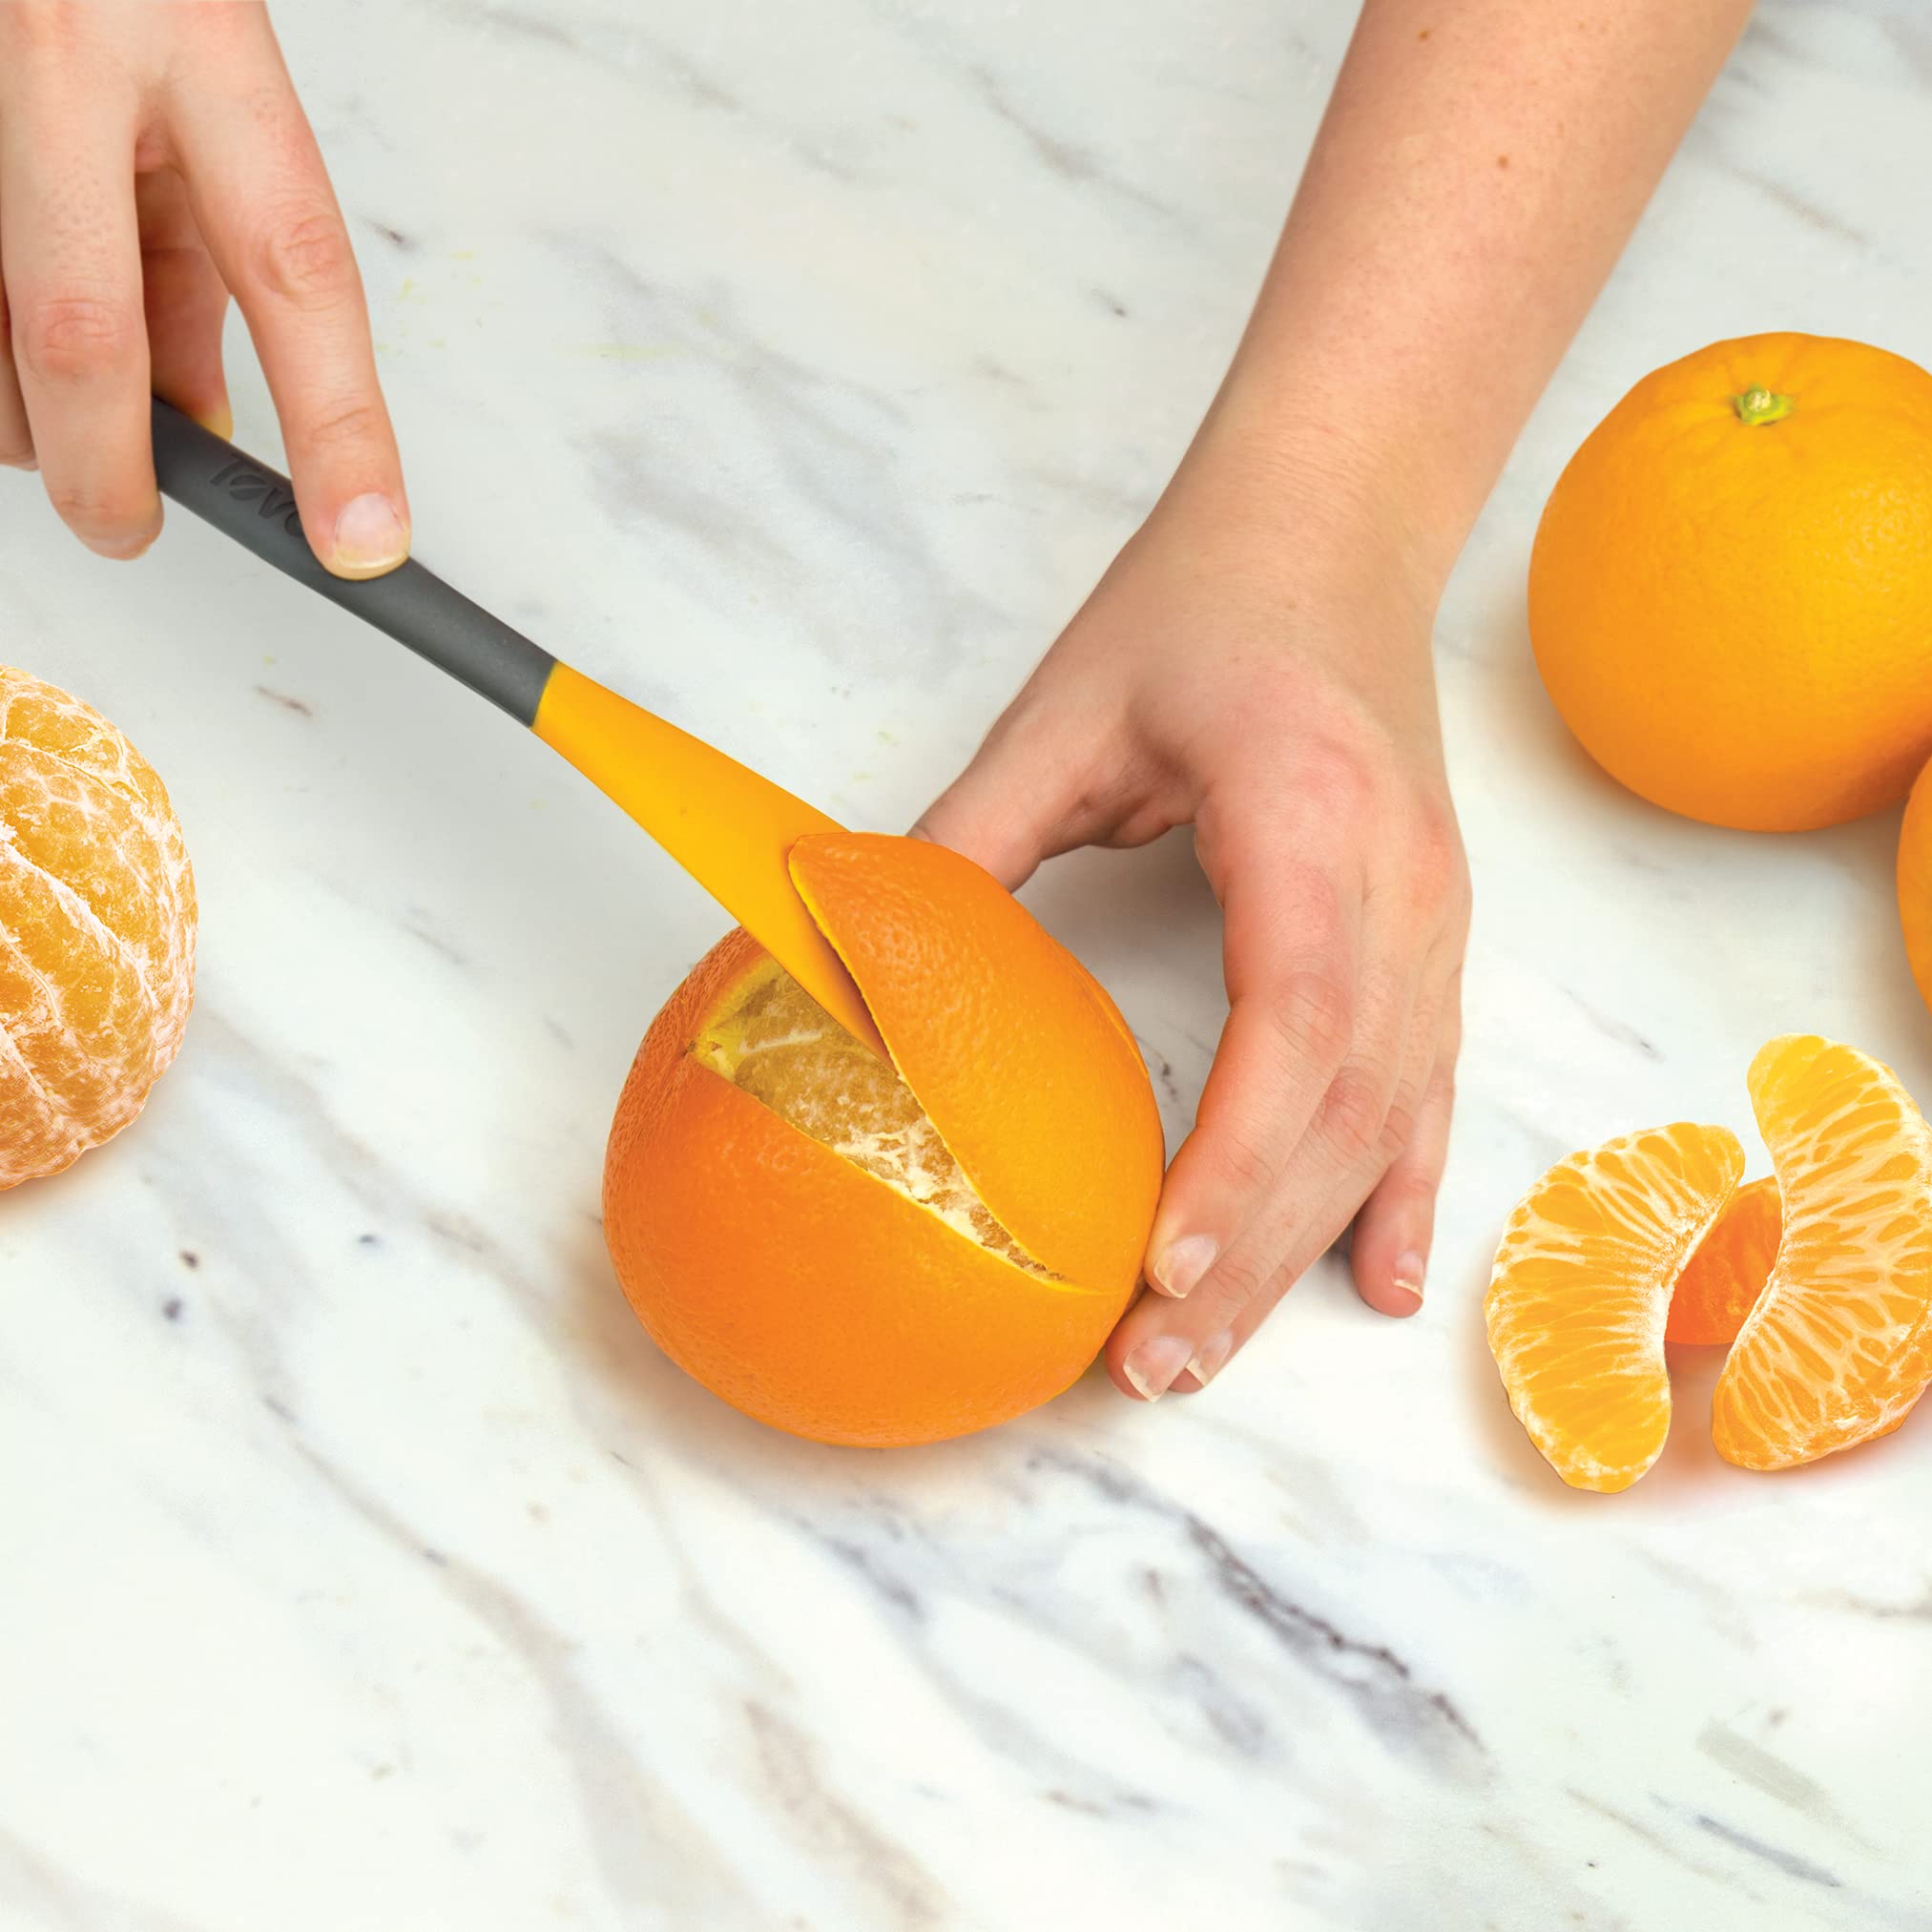 Tovolo 2-In-1 Citrus Tool, 2-In-1 Orange Peeler Tool With Non-Slip Handle, Double-Ended Citrus Peeler for Kitchen, Citrus Pith Slicer & Removal Paddle Kitchen Tool Large